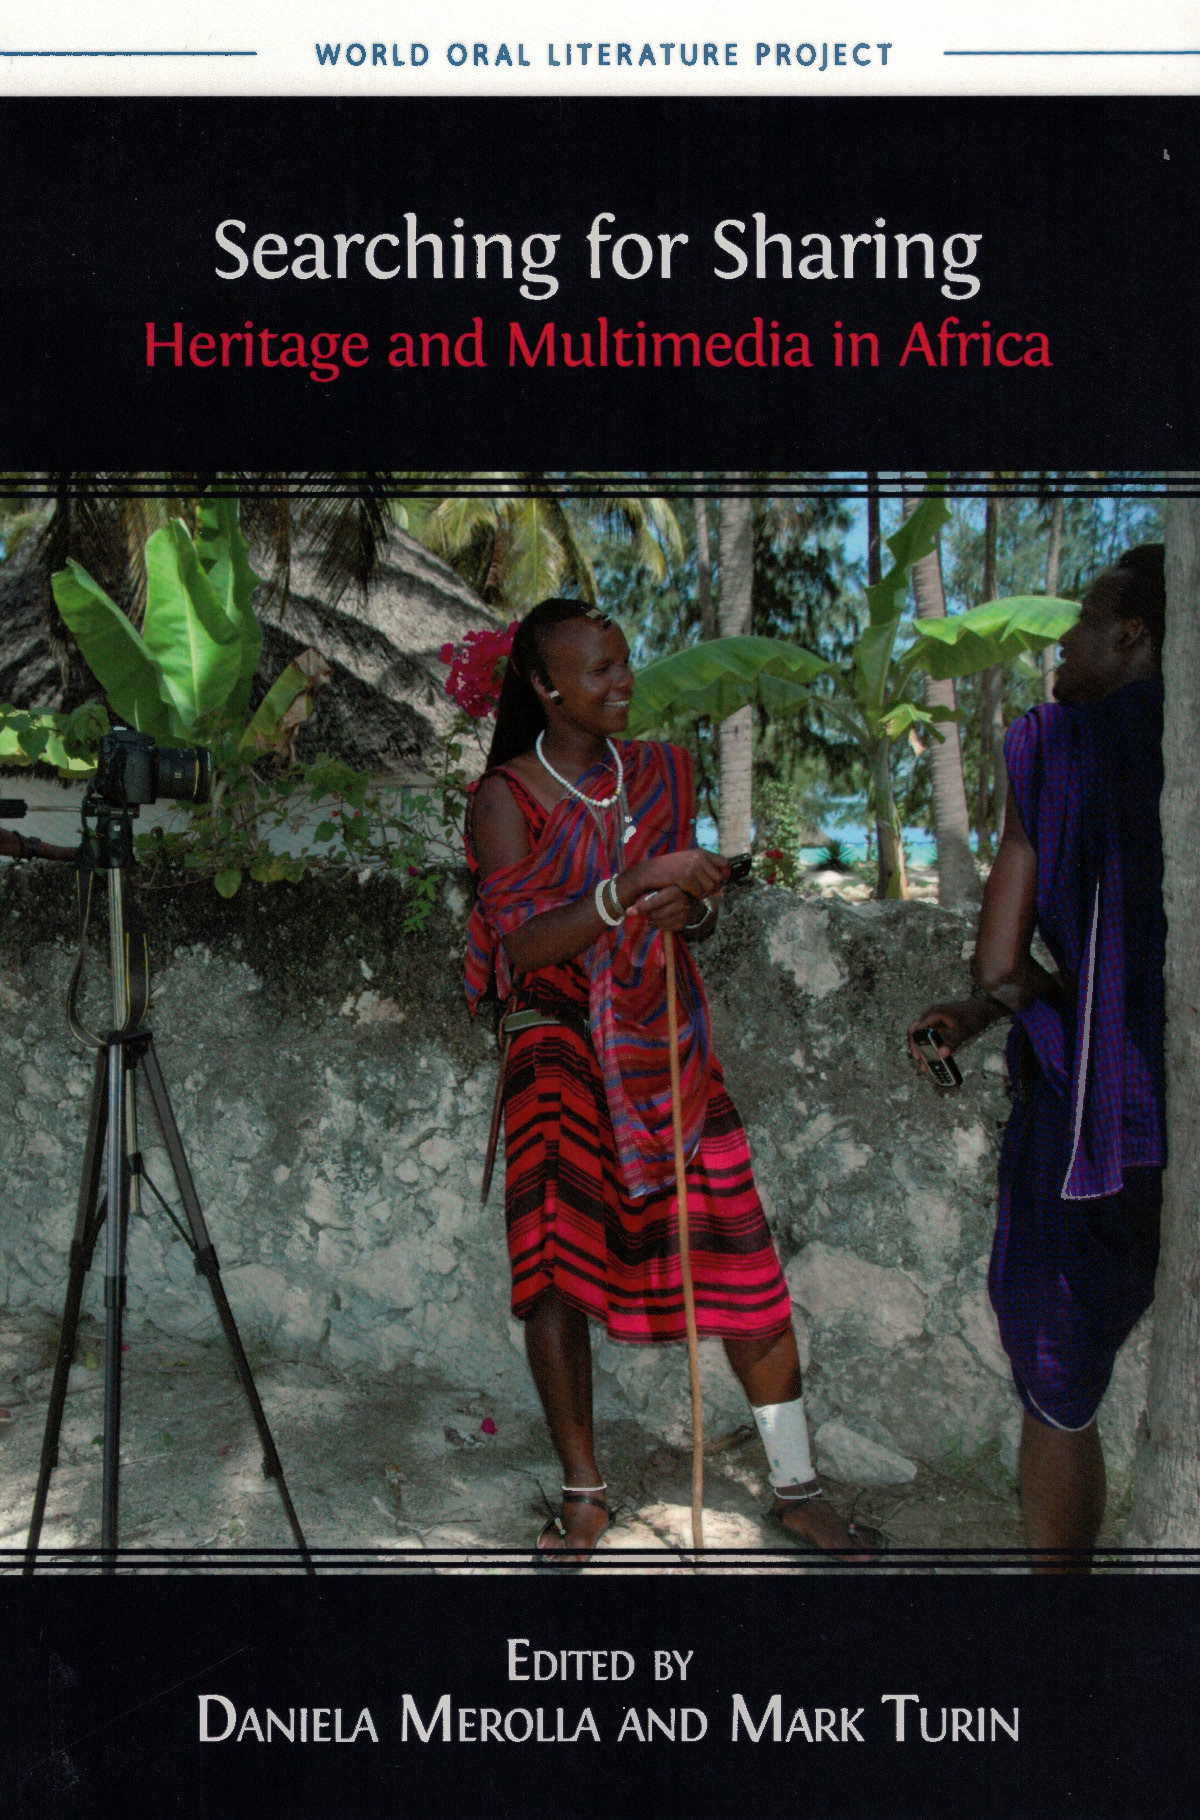 Daniela Merolla and Mark Turin (eds.), Searching for Sharing Heritage and Multimedia in Africa